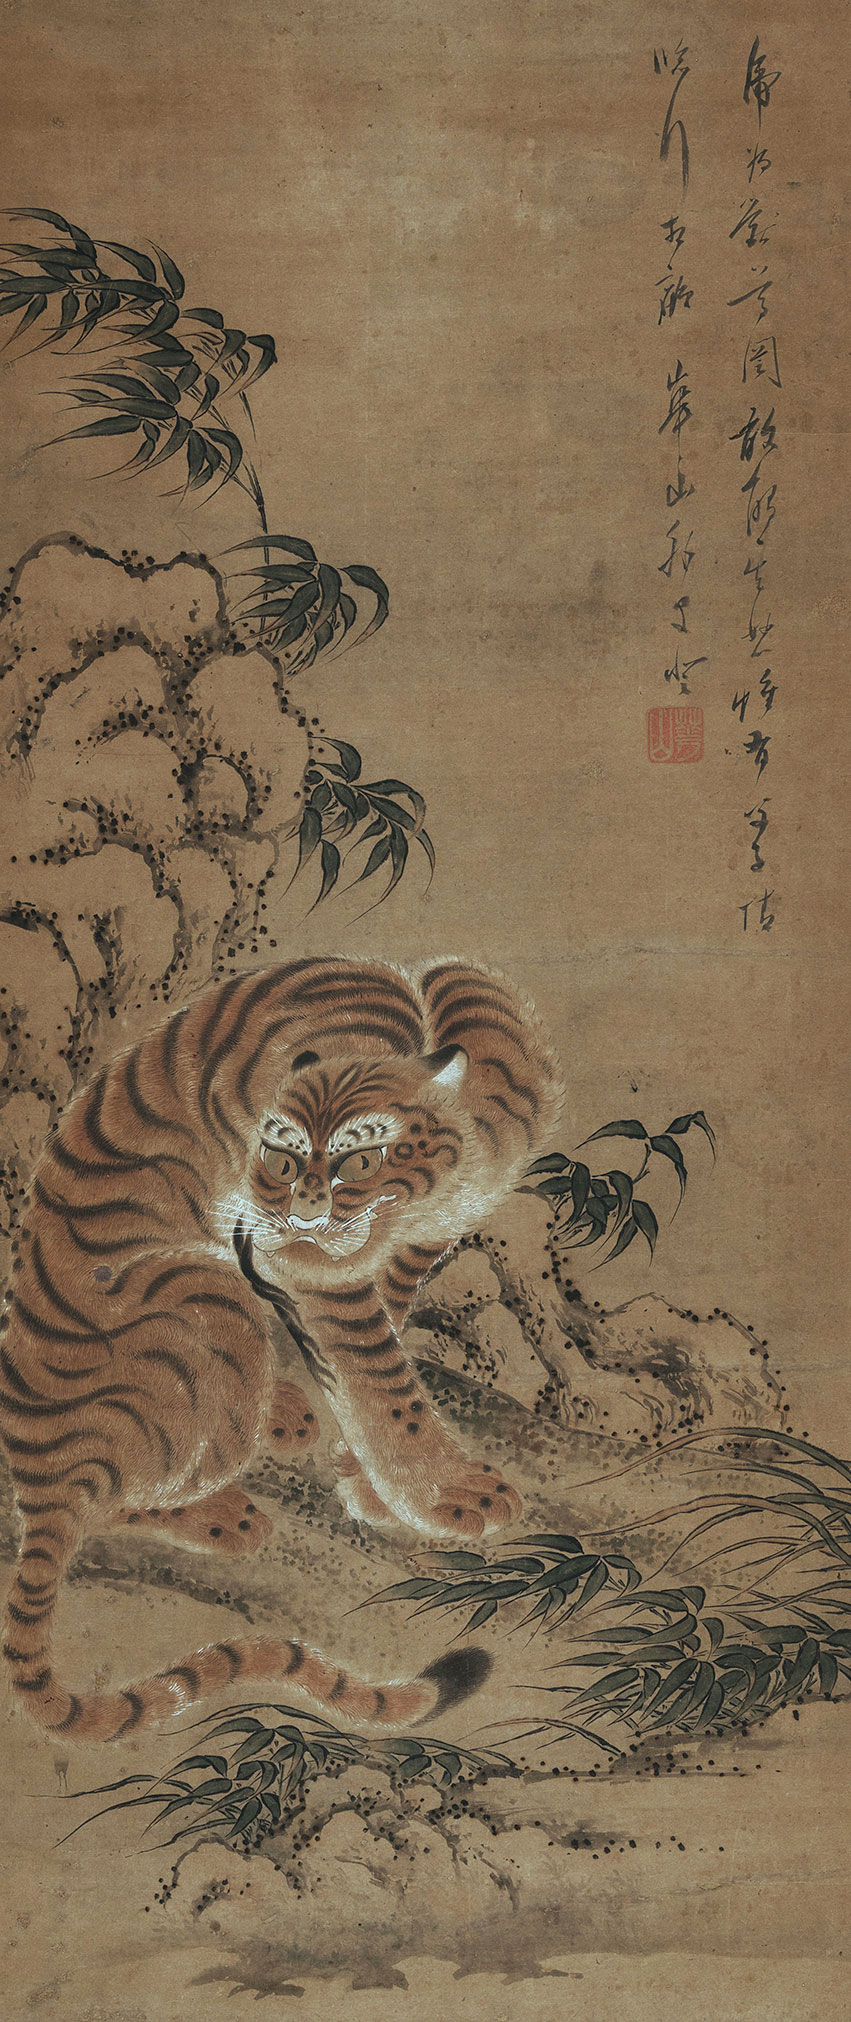 Watanabe Kazan. Edo, 1793-1841. A tiger seeking shelter under a rock, 1810s. Painting in ink and colours on paper, 125 x 52,5 cm_RET